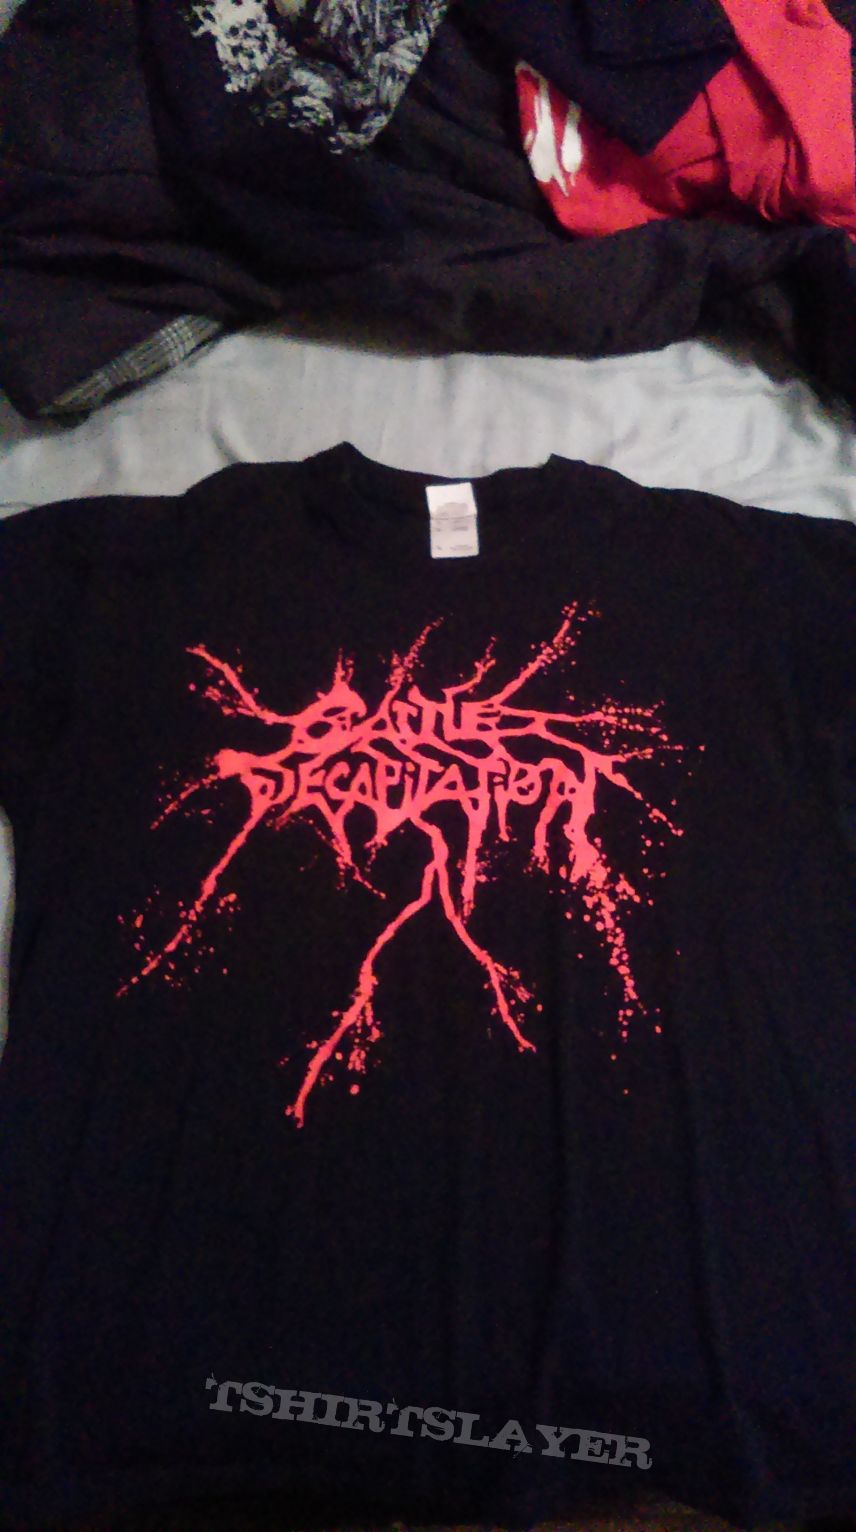 XL Cattle Decapitation T-Shirt for S*A*L*E